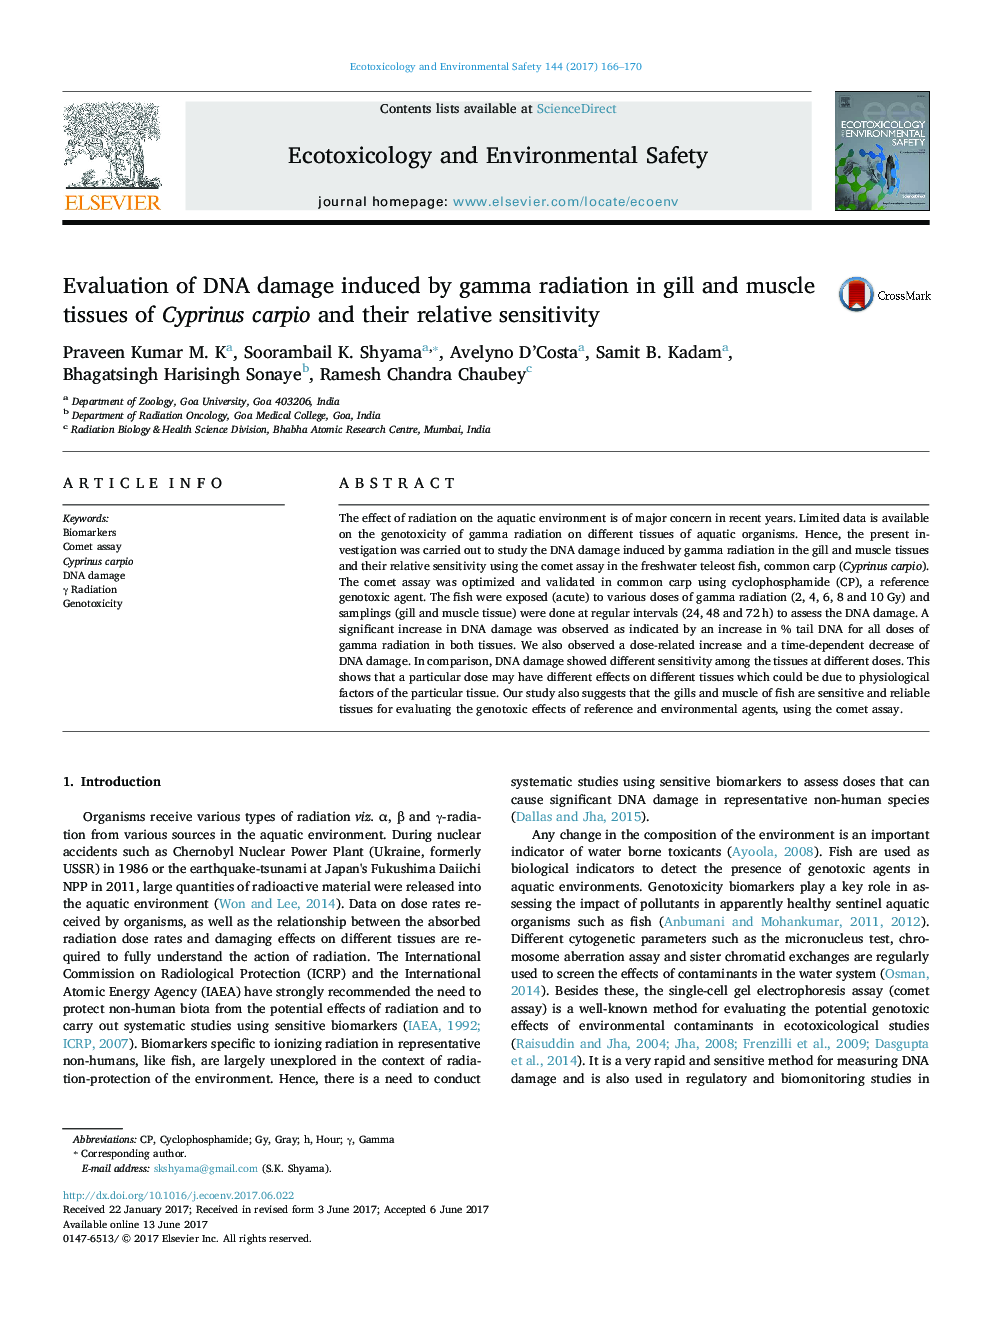 Evaluation of DNA damage induced by gamma radiation in gill and muscle tissues of Cyprinus carpio and their relative sensitivity